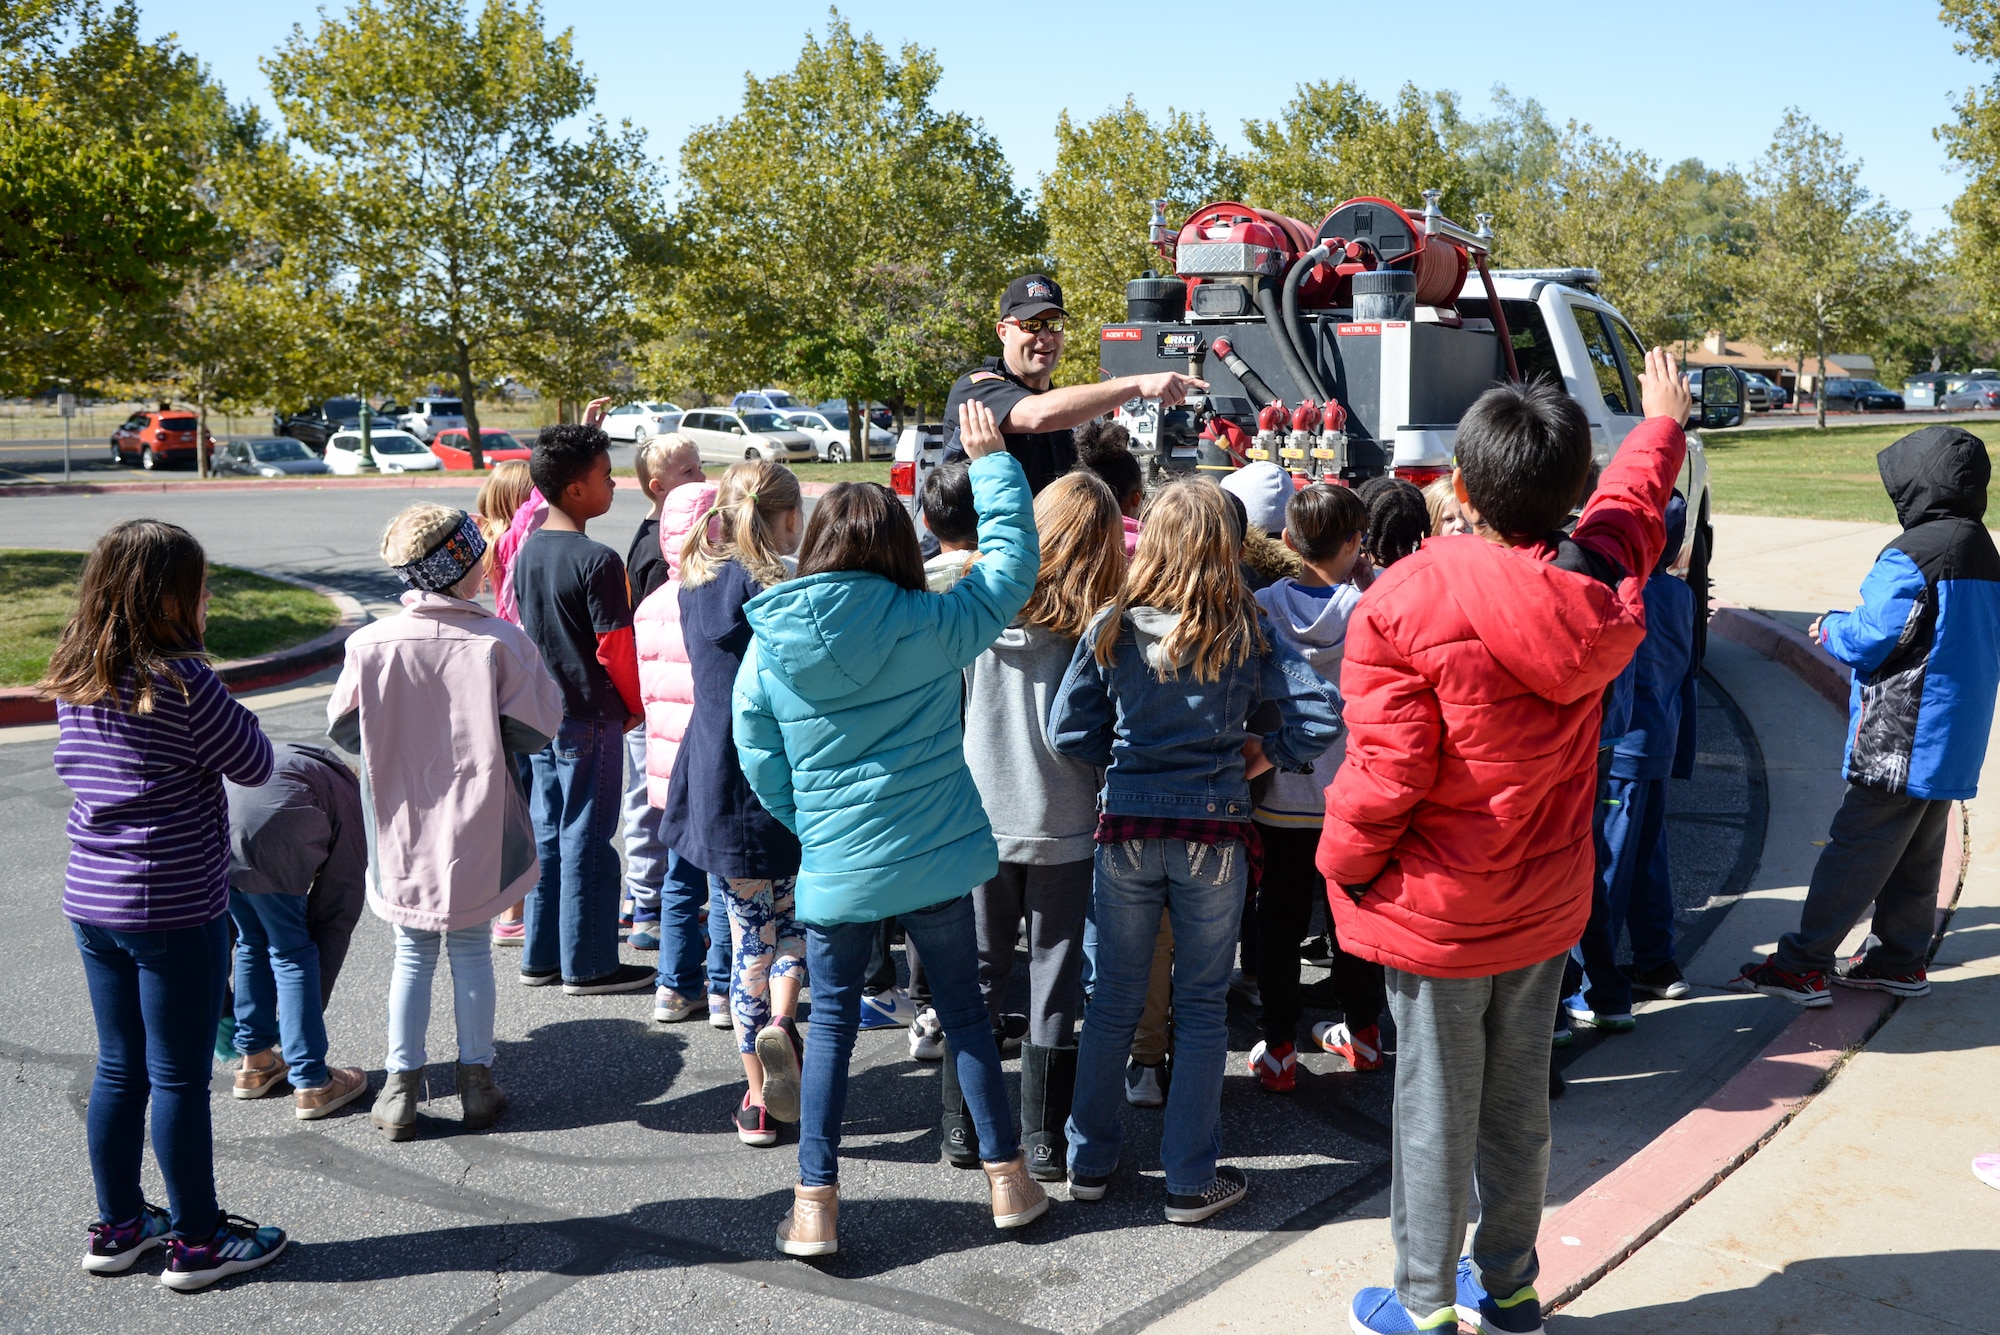 Doran Smith, Fire and Emergency Services at Hill Air Force Base, Utah, talks to Hill Field Elementary students about fire safety Oct. 10, 2019, in front of the department's new heavy-brush truck. This was one of the numerous outreach events base firefighters sponsored for Fire Prevention Week Oct. 6-12. (U.S. Air Force photo by Cynthia Griggs)